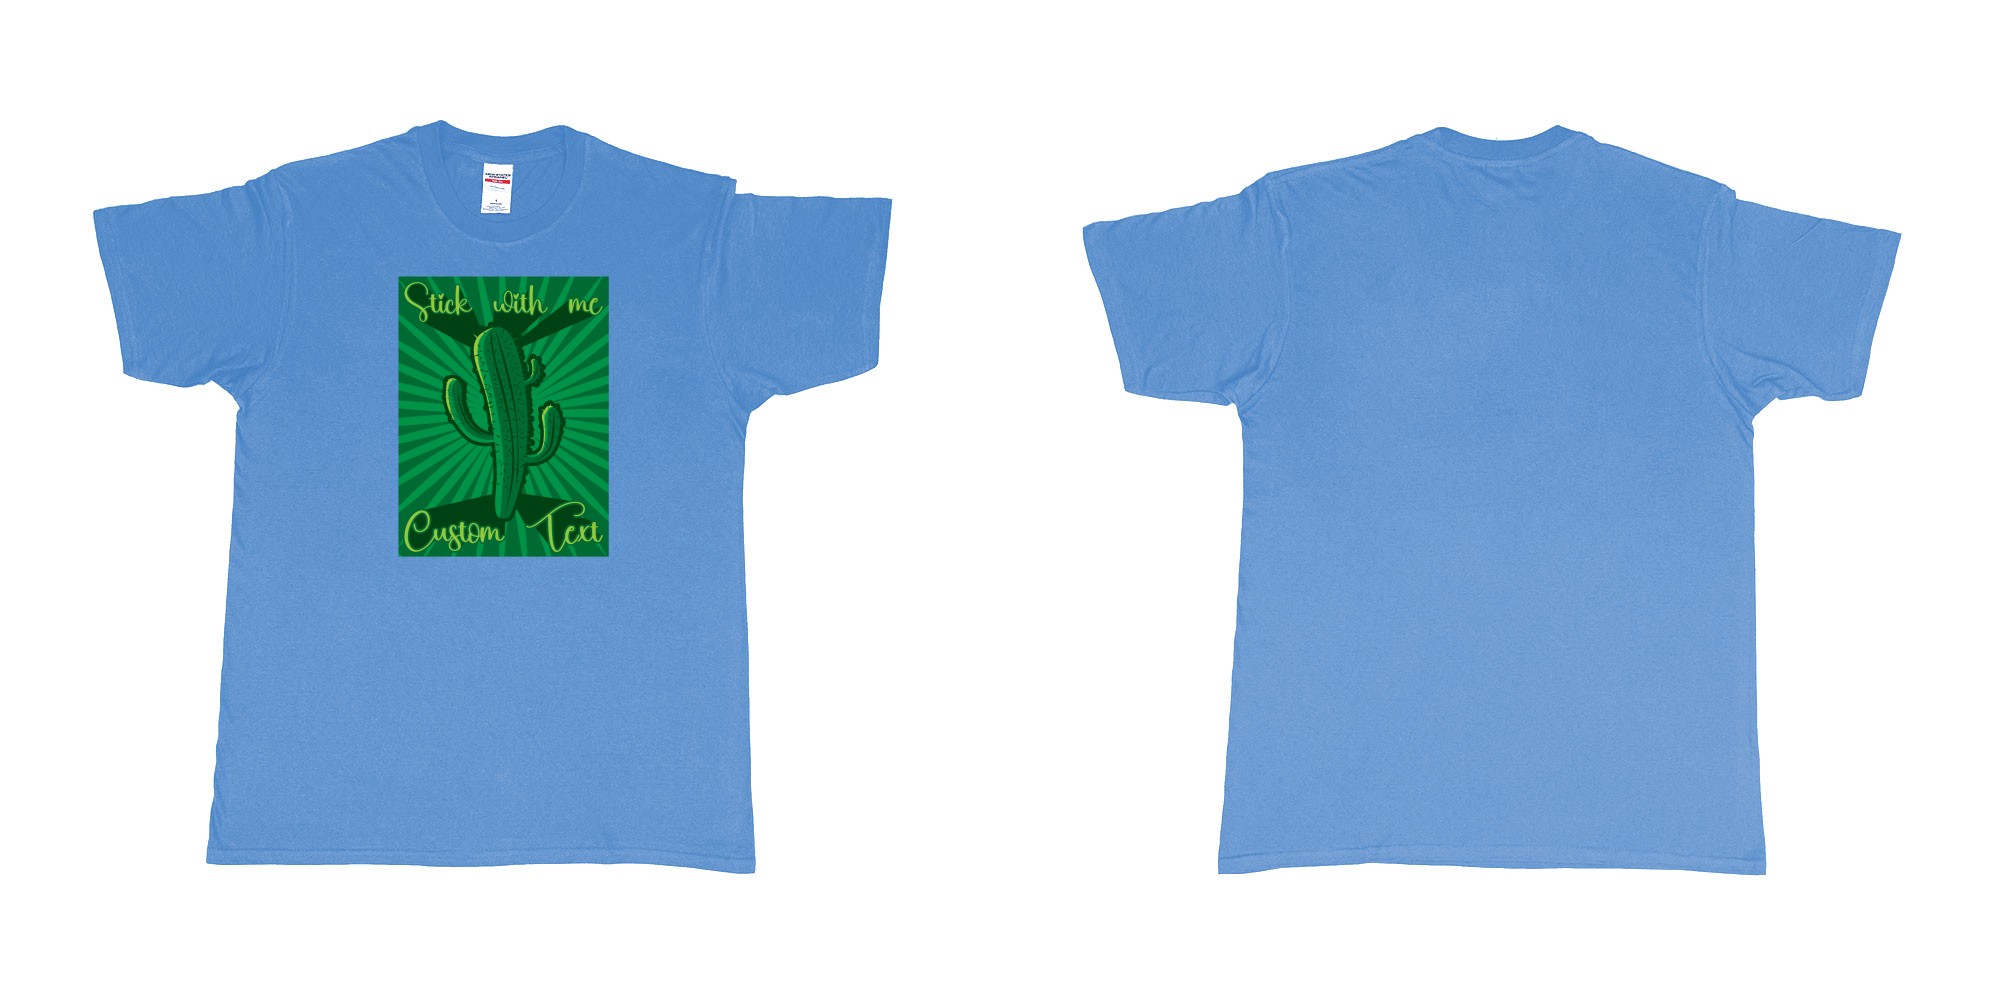 Custom tshirt design cactus stick with me in fabric color carolina-blue choice your own text made in Bali by The Pirate Way